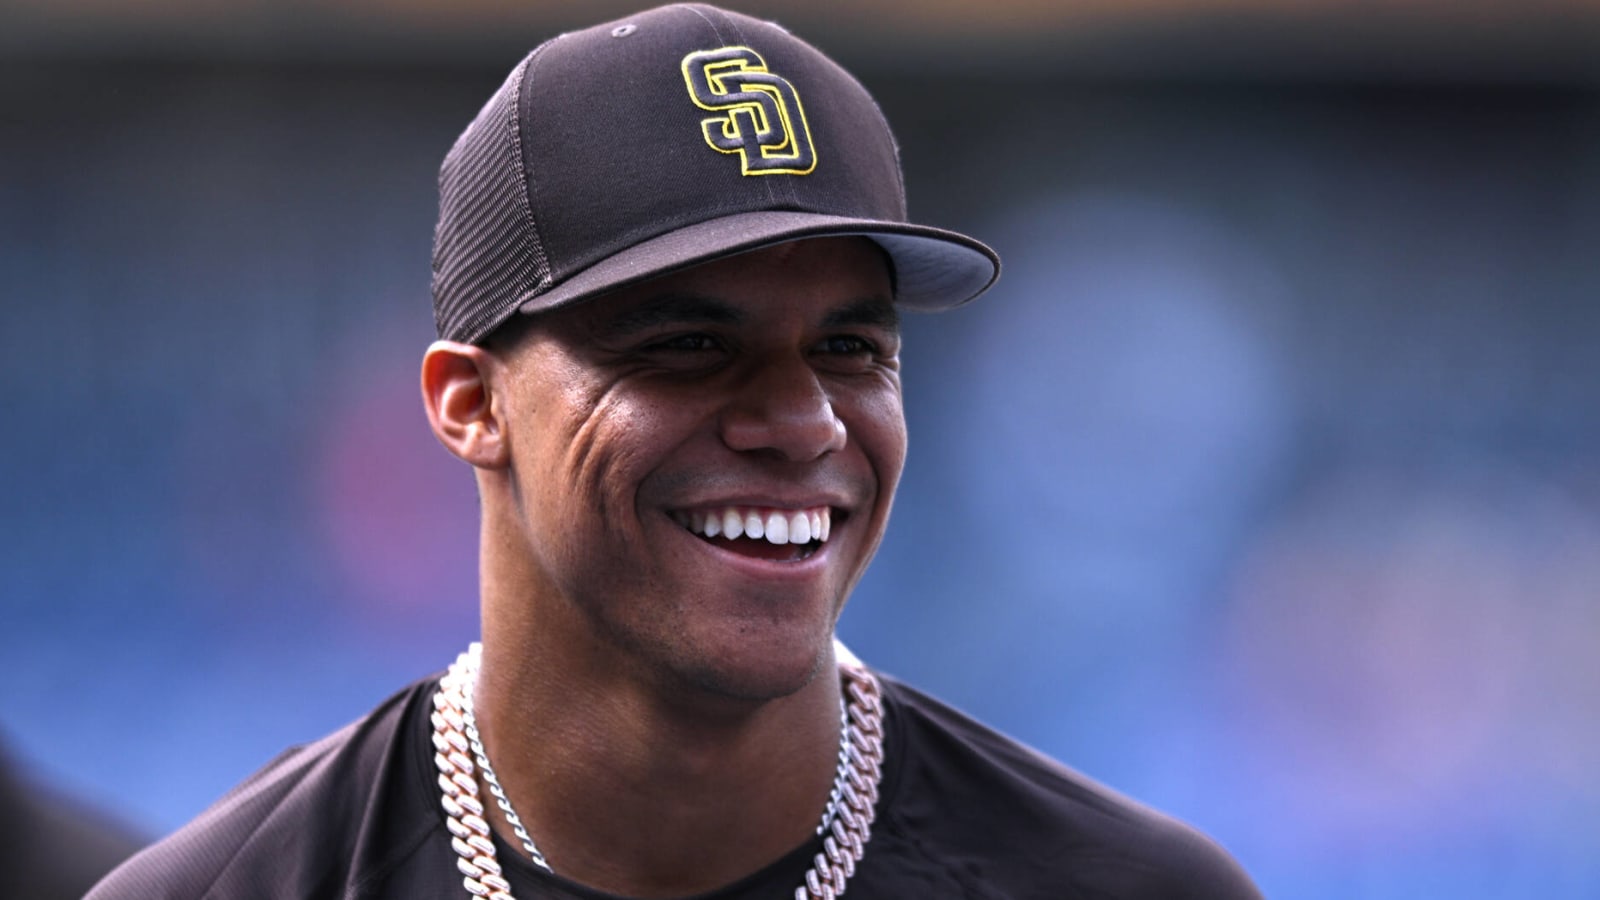 Local Barber Gives Juan Soto First Haircut After San Diego Padres Deal 